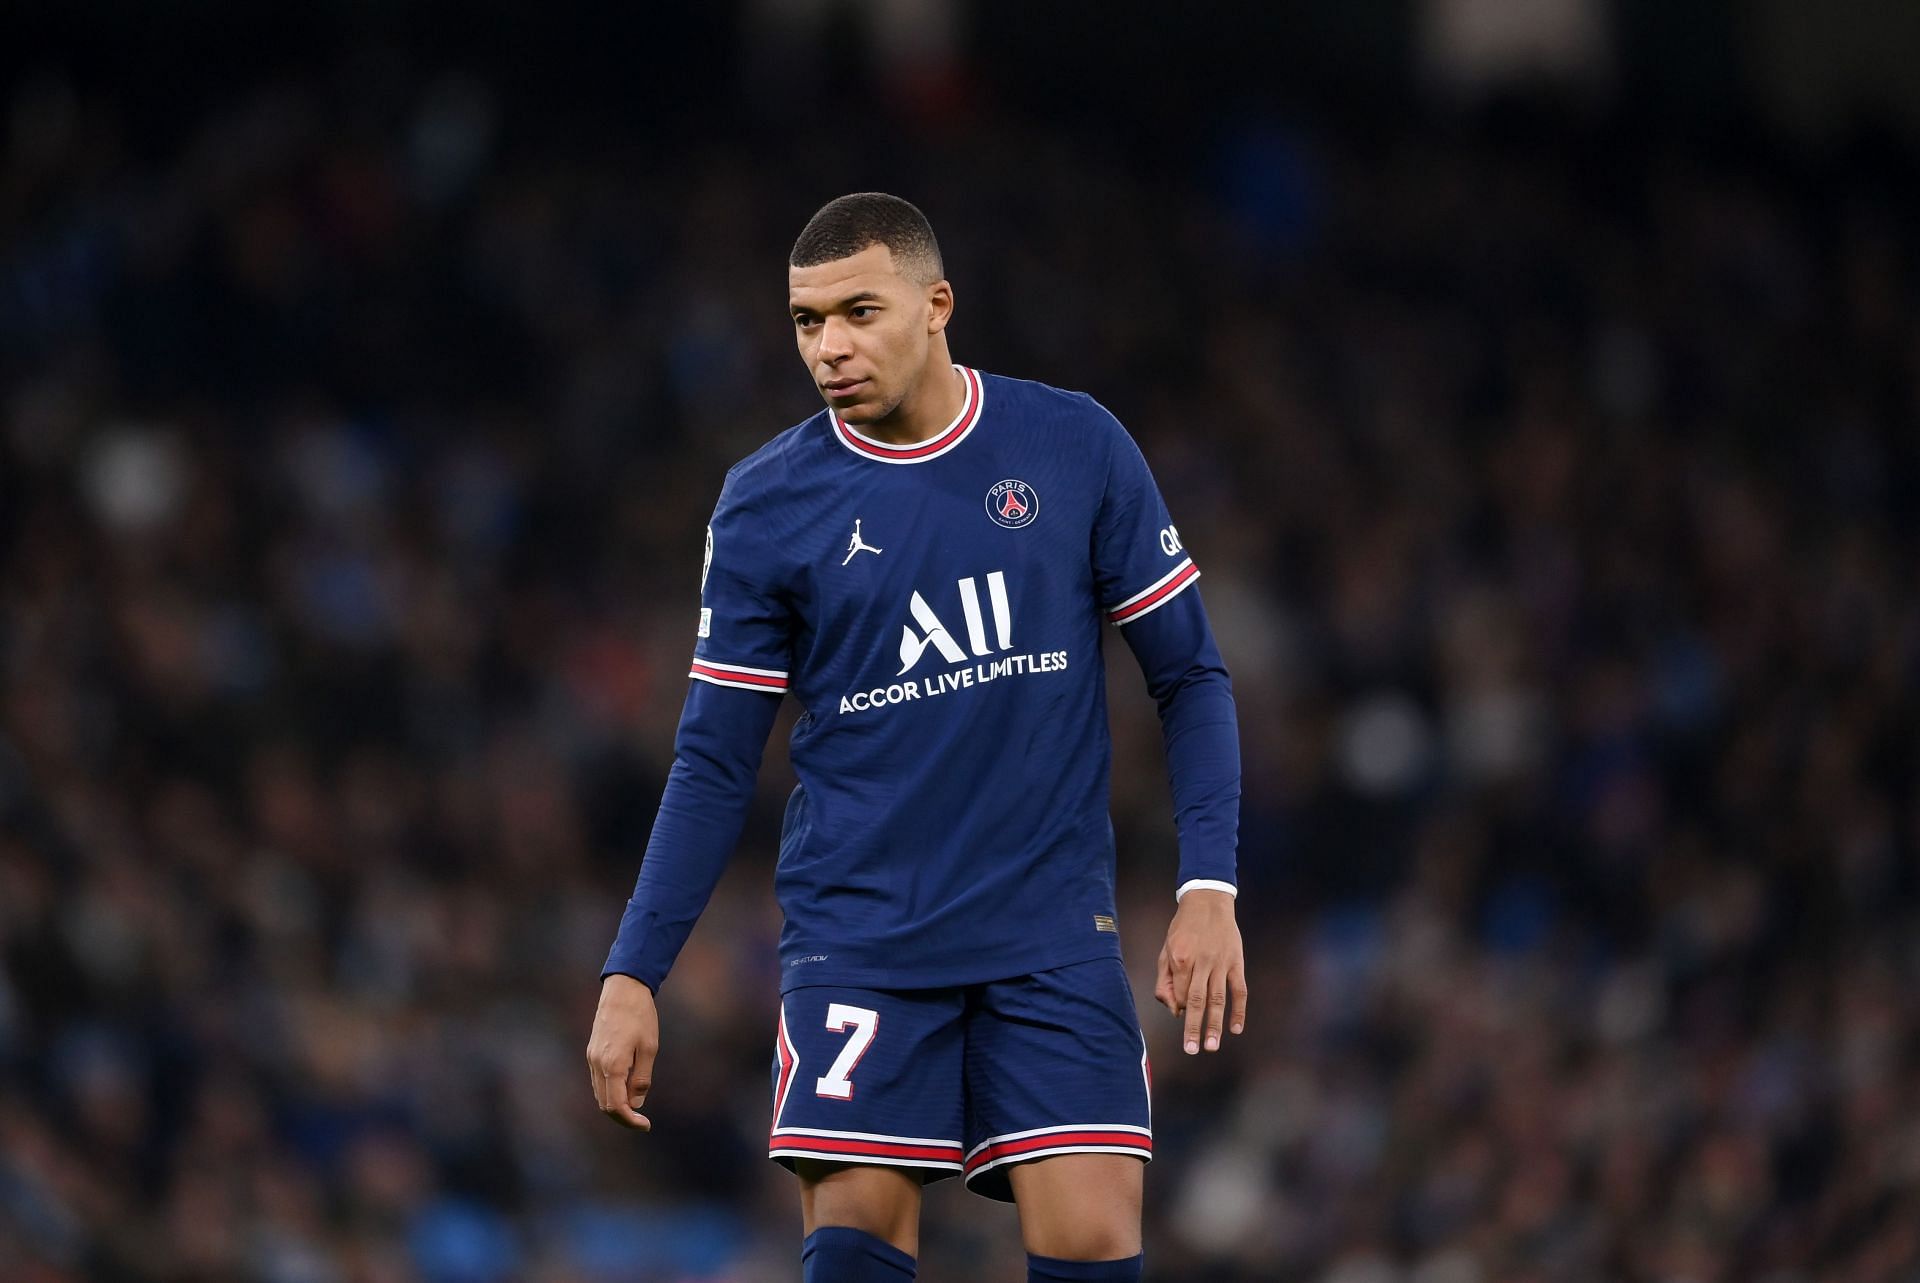 Frank Leboeuf believes the Blues need to sign Mbappe if they wish to catch Manchester City.